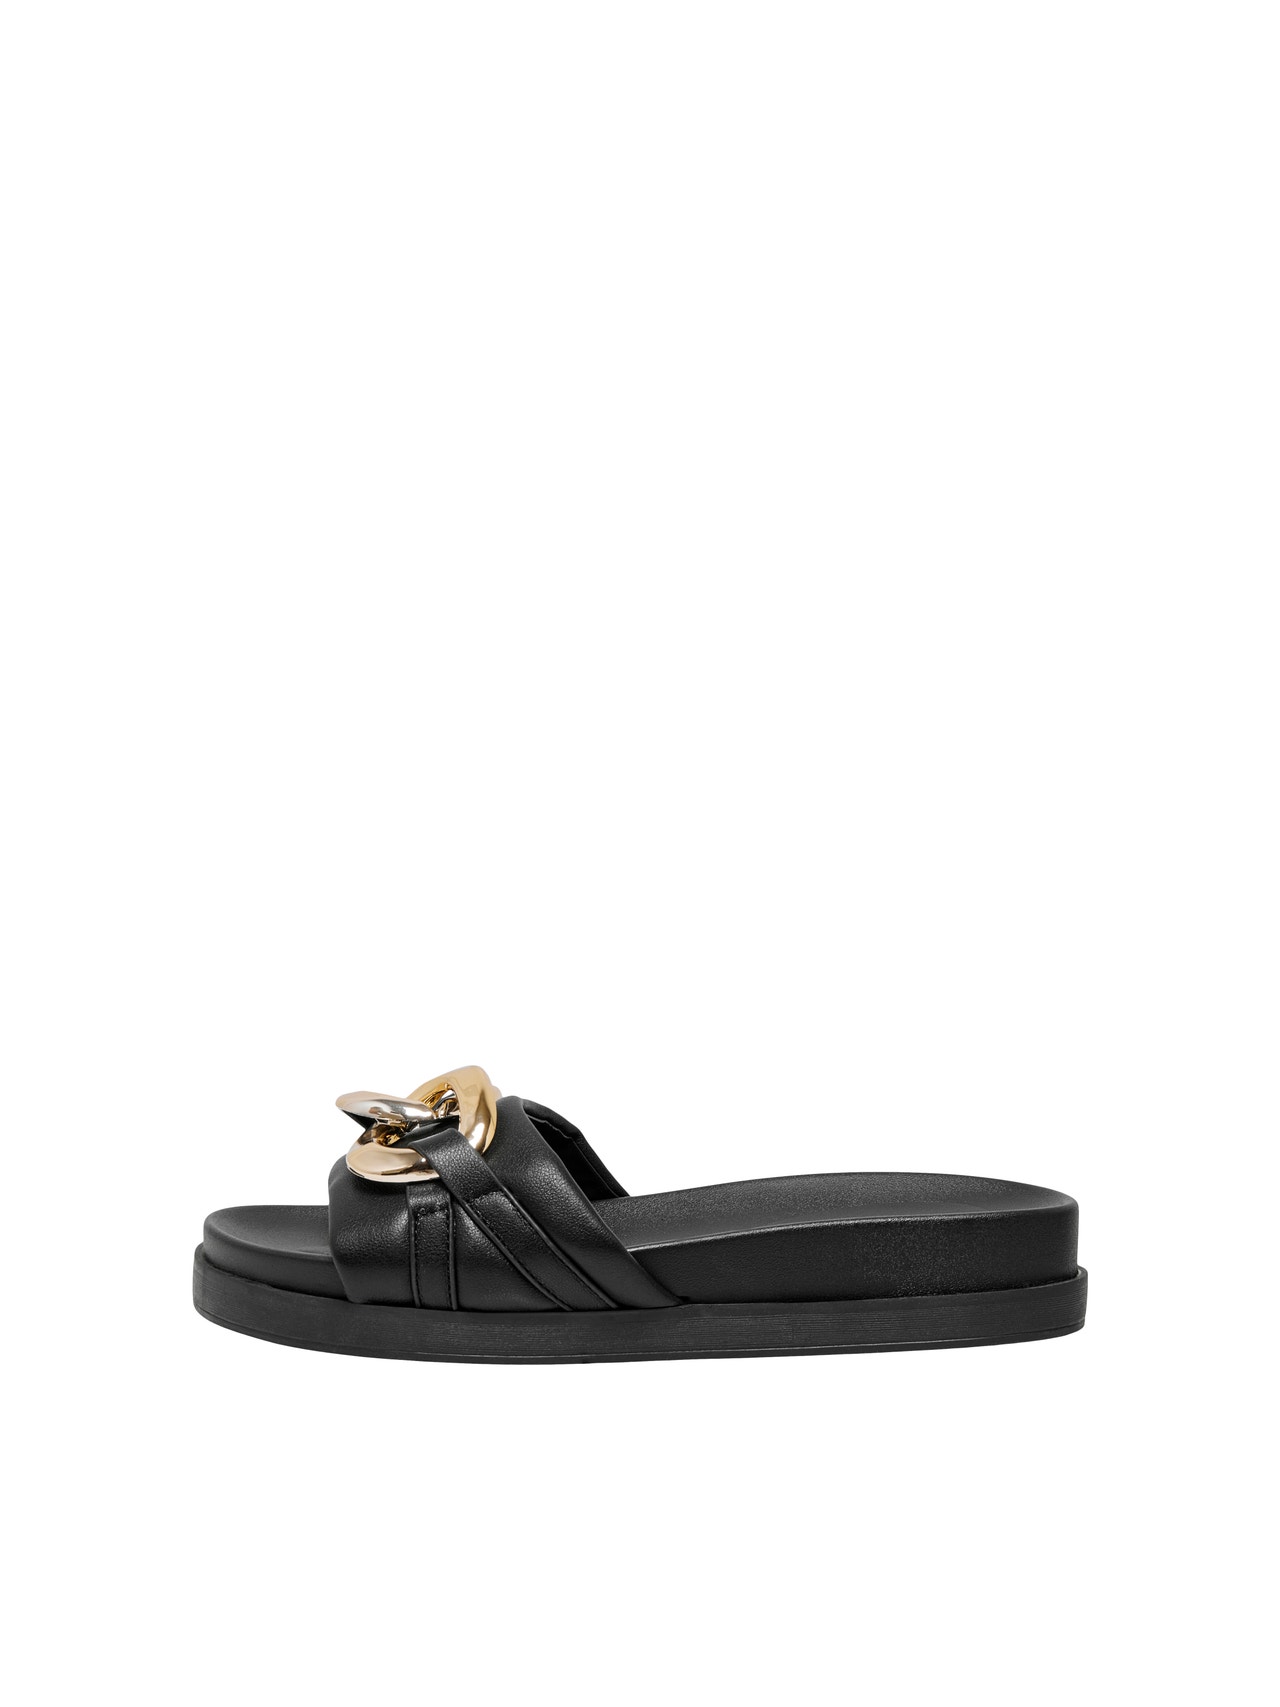 ONLY Faux leather sandals -Black - 15288653